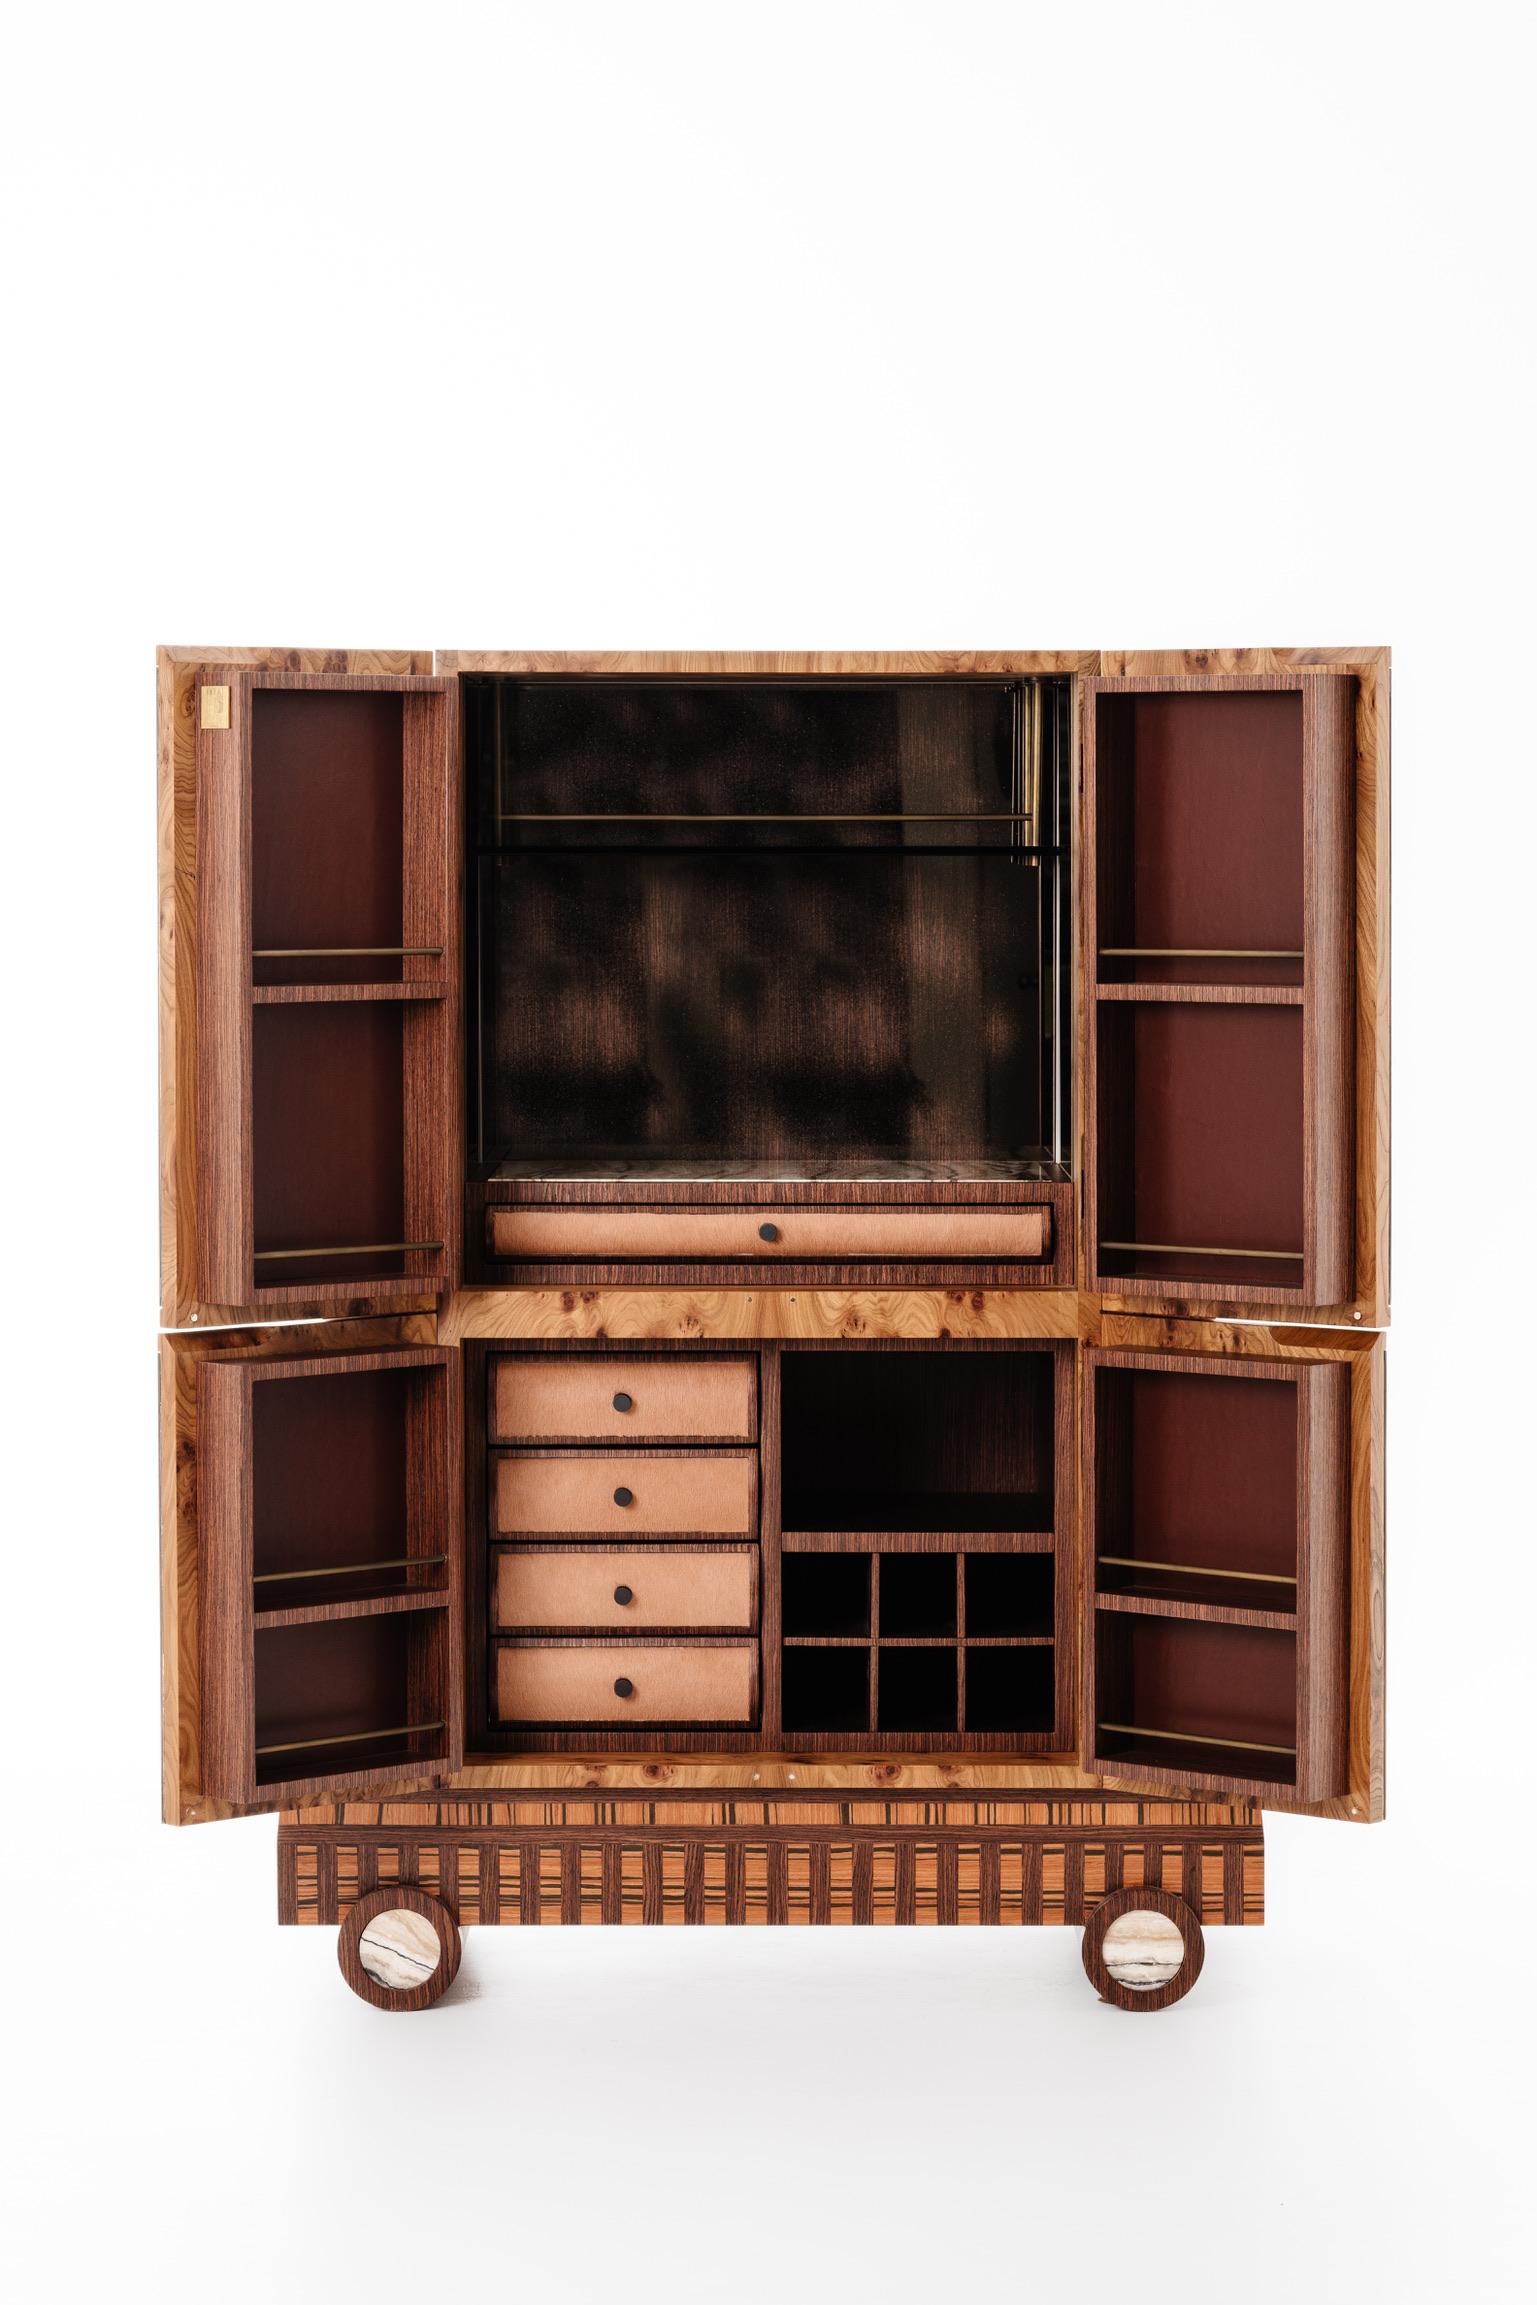 The graphic layering of exotic burled and cathedral grained woods create the elevated “locker” bar cabinet. Interiors are adorned in woods, hand-woven leather, a touch of onyx and the most exquisite eglomise mirror cladding the interiors walls.